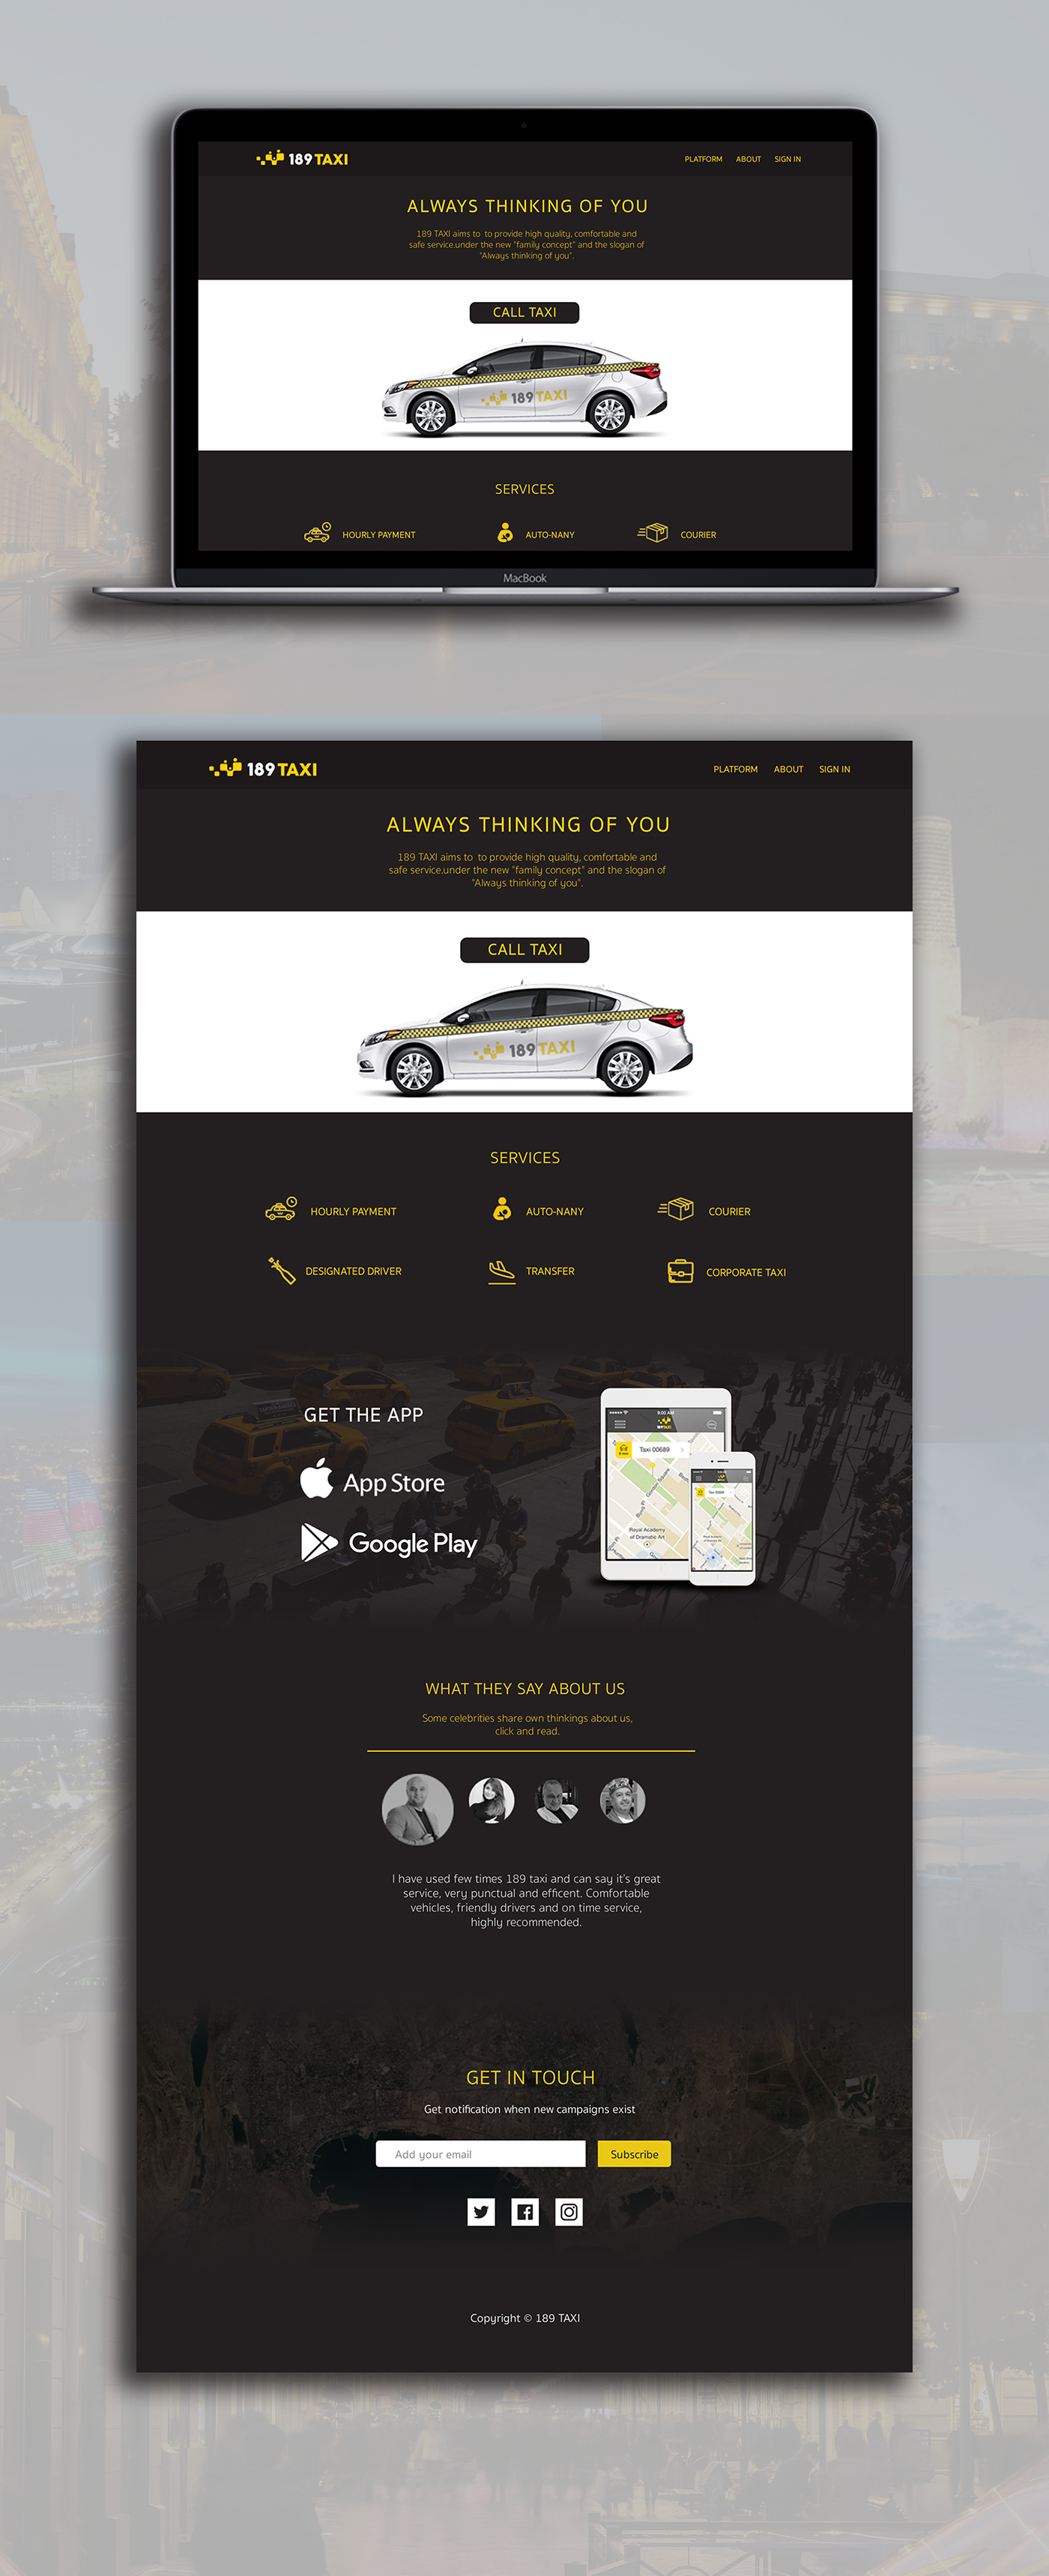 taxi Website Webdesign ux UI taxify 189taxi